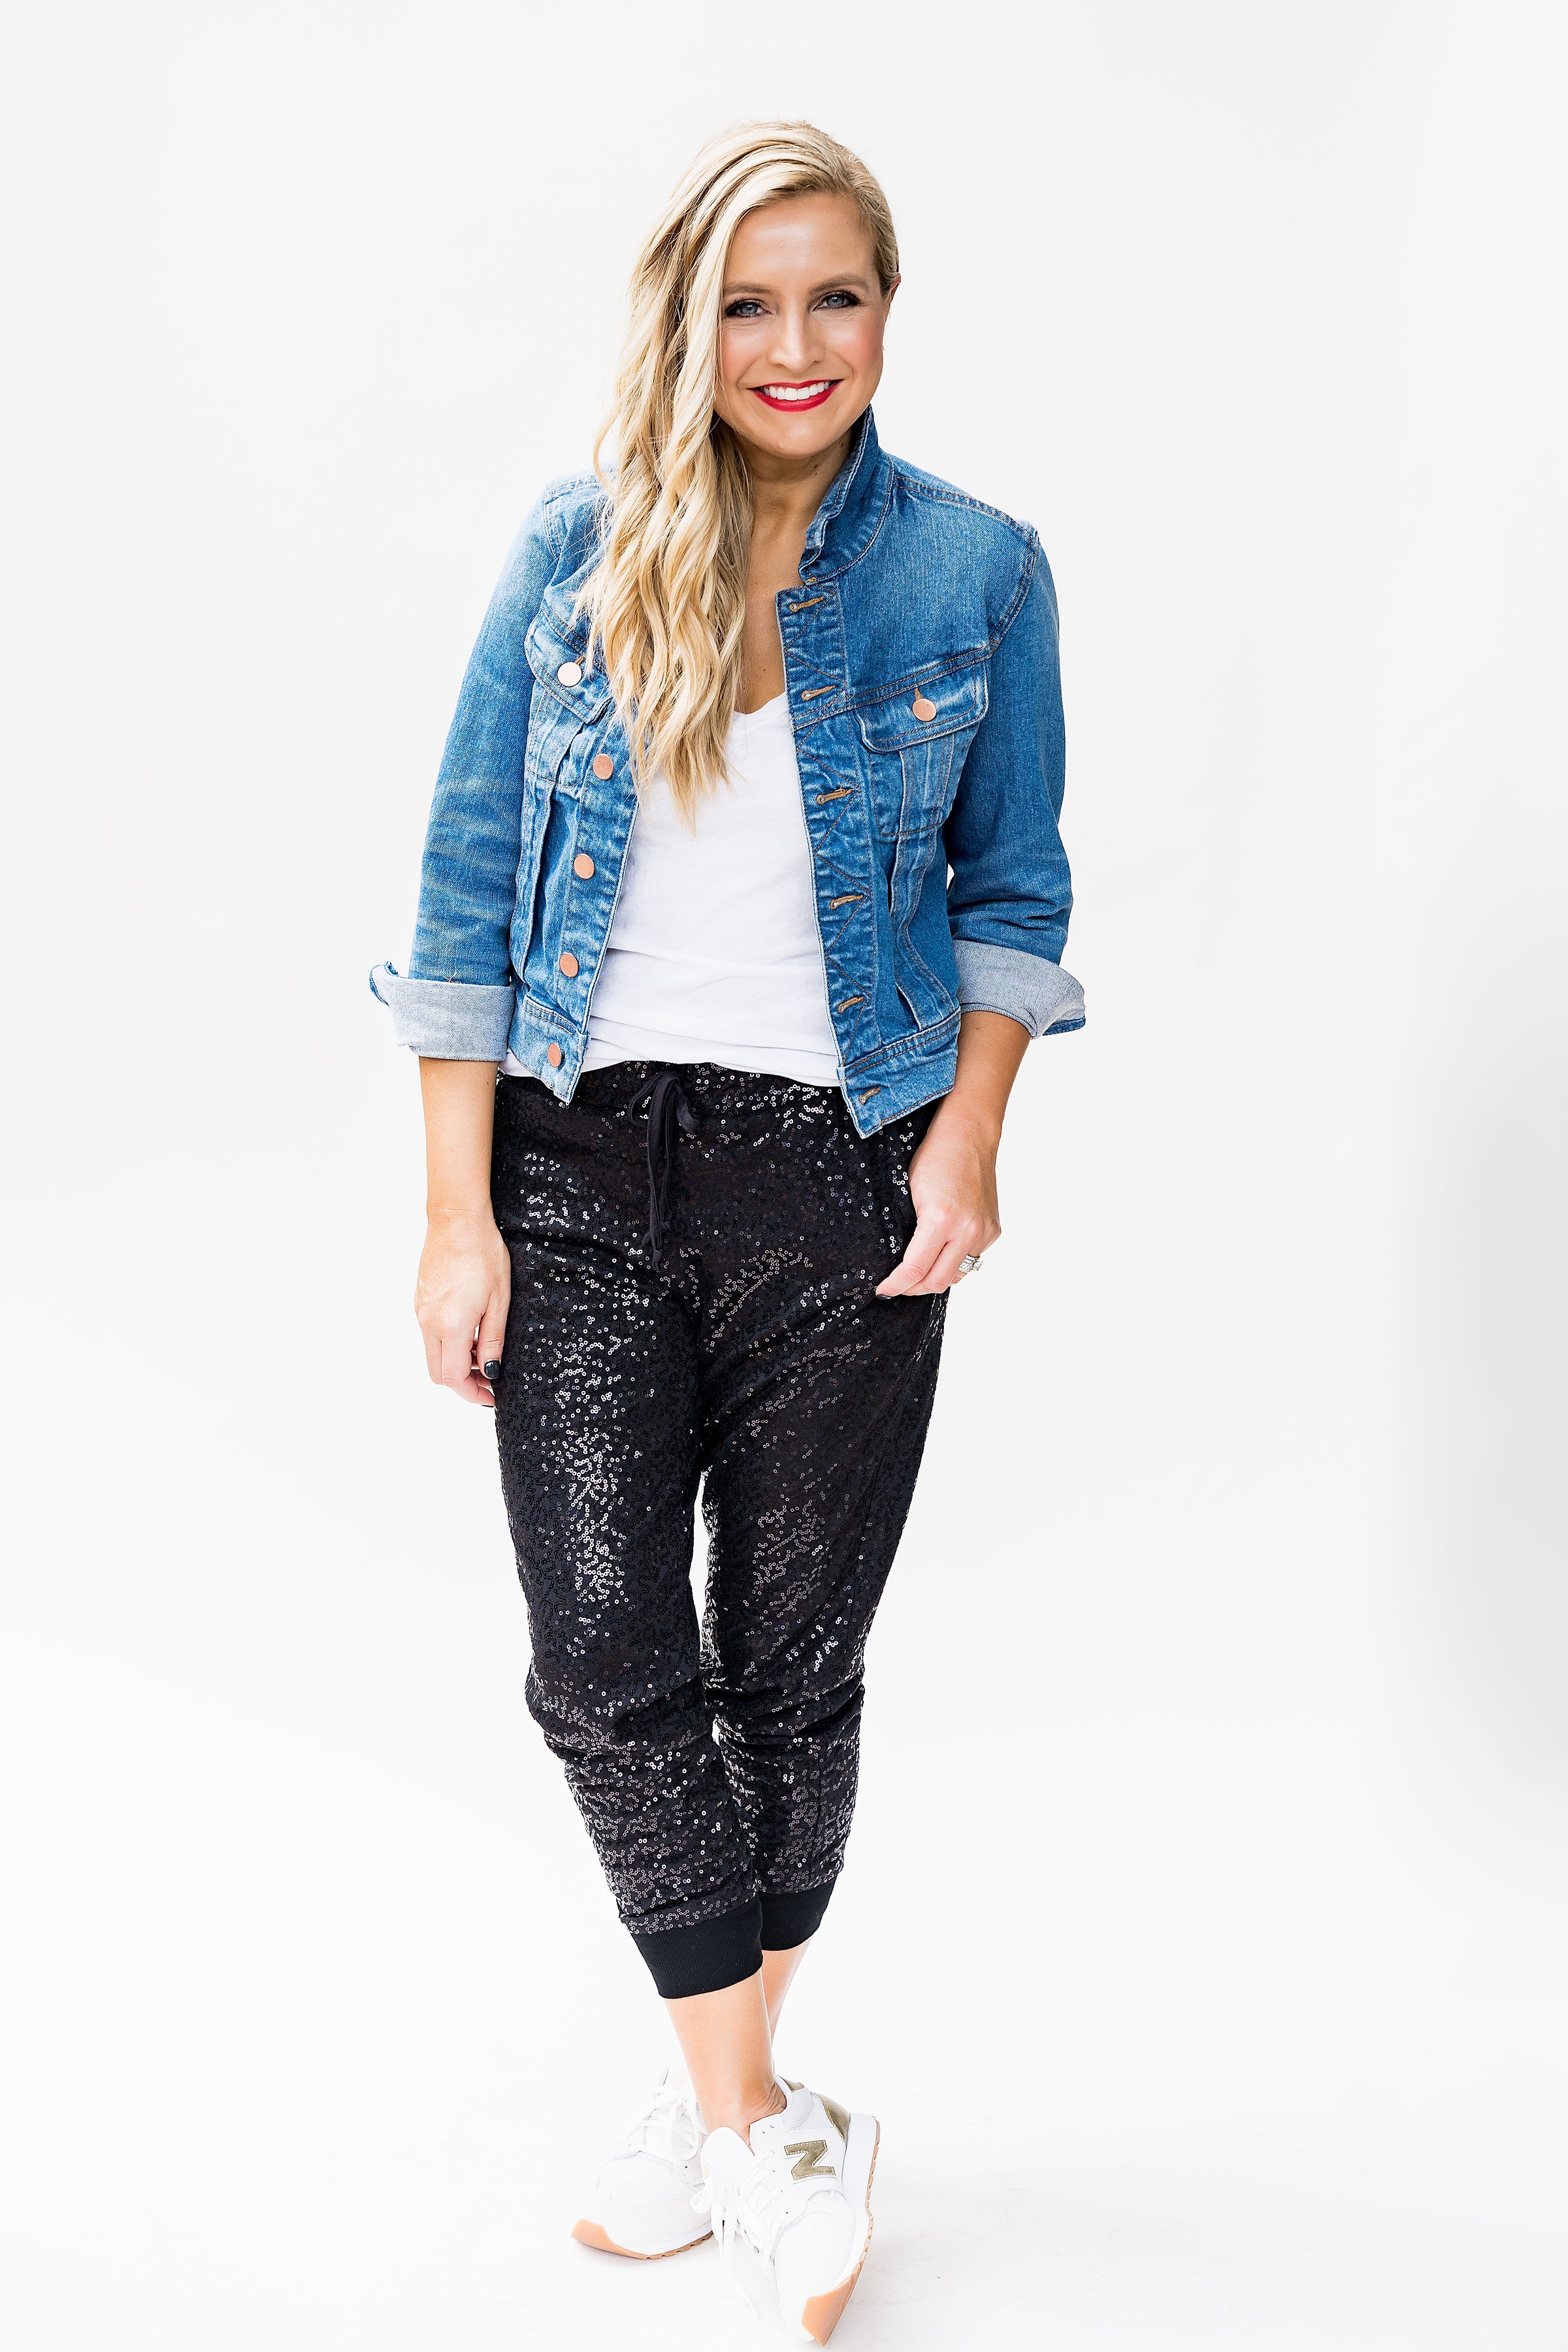  gibson glam holiday outfit ideas - the "Ashley" sequin joggers in black